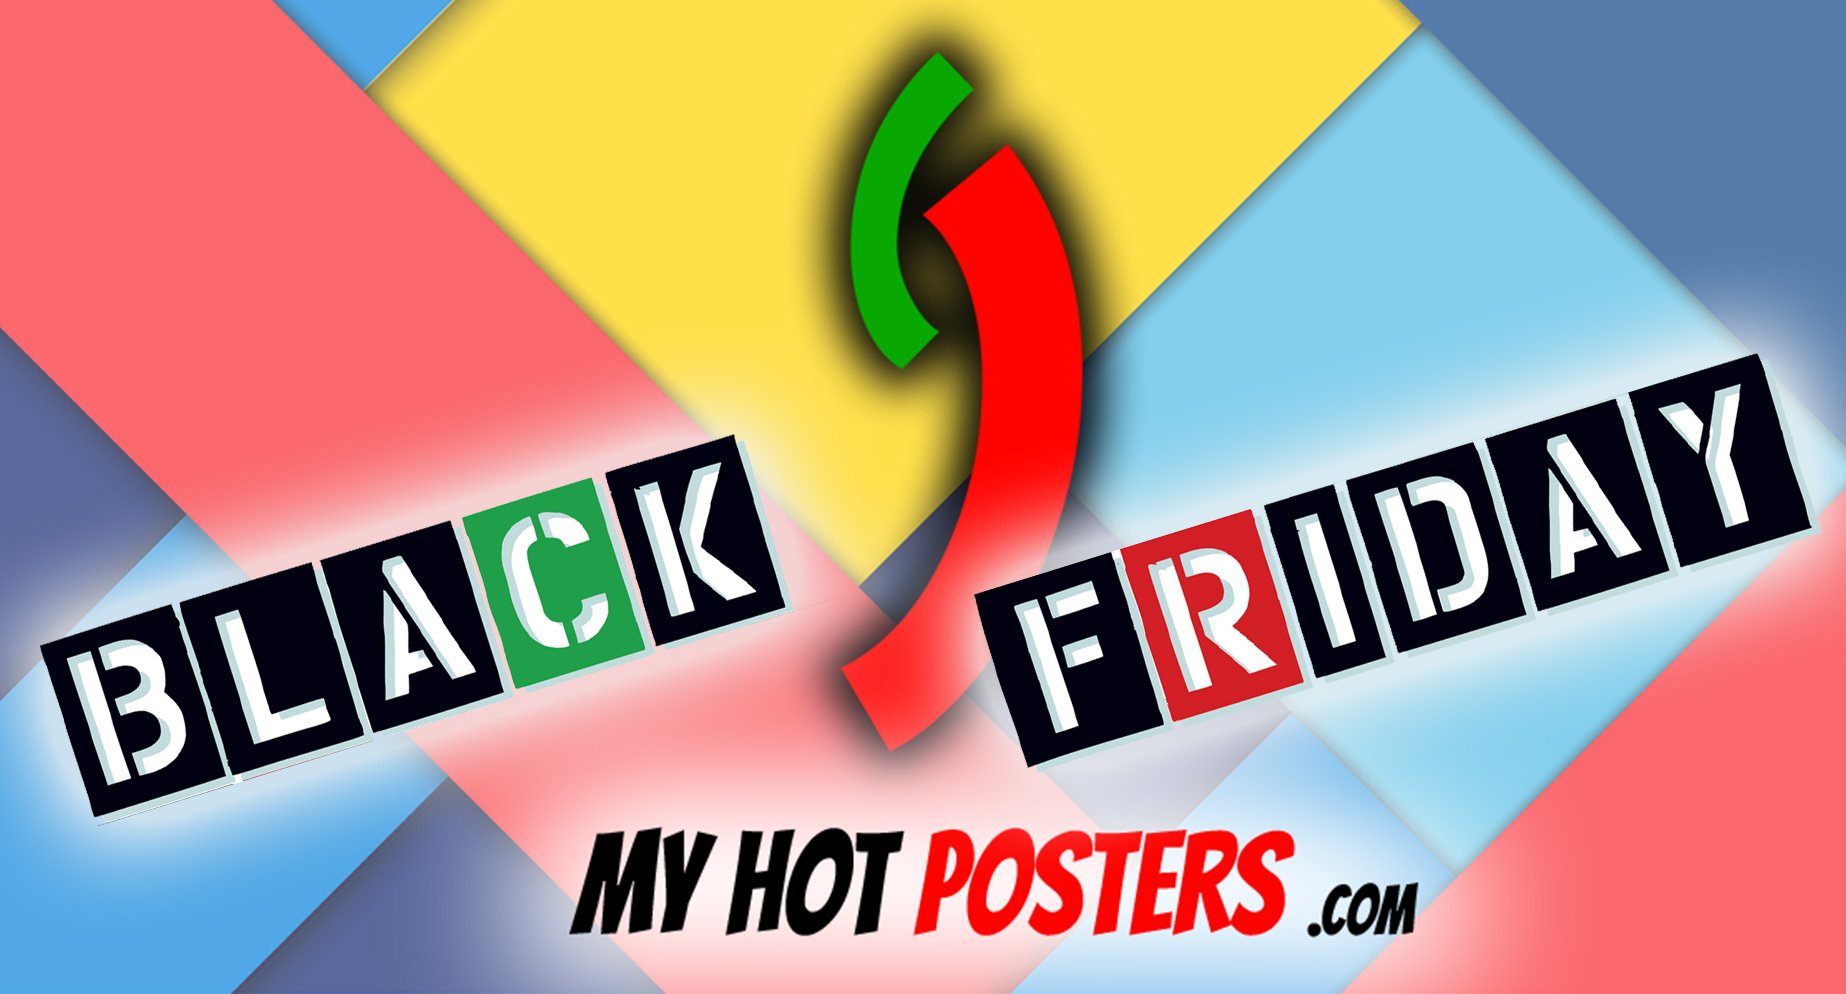 My Hot Posters (@myhotposters) / X